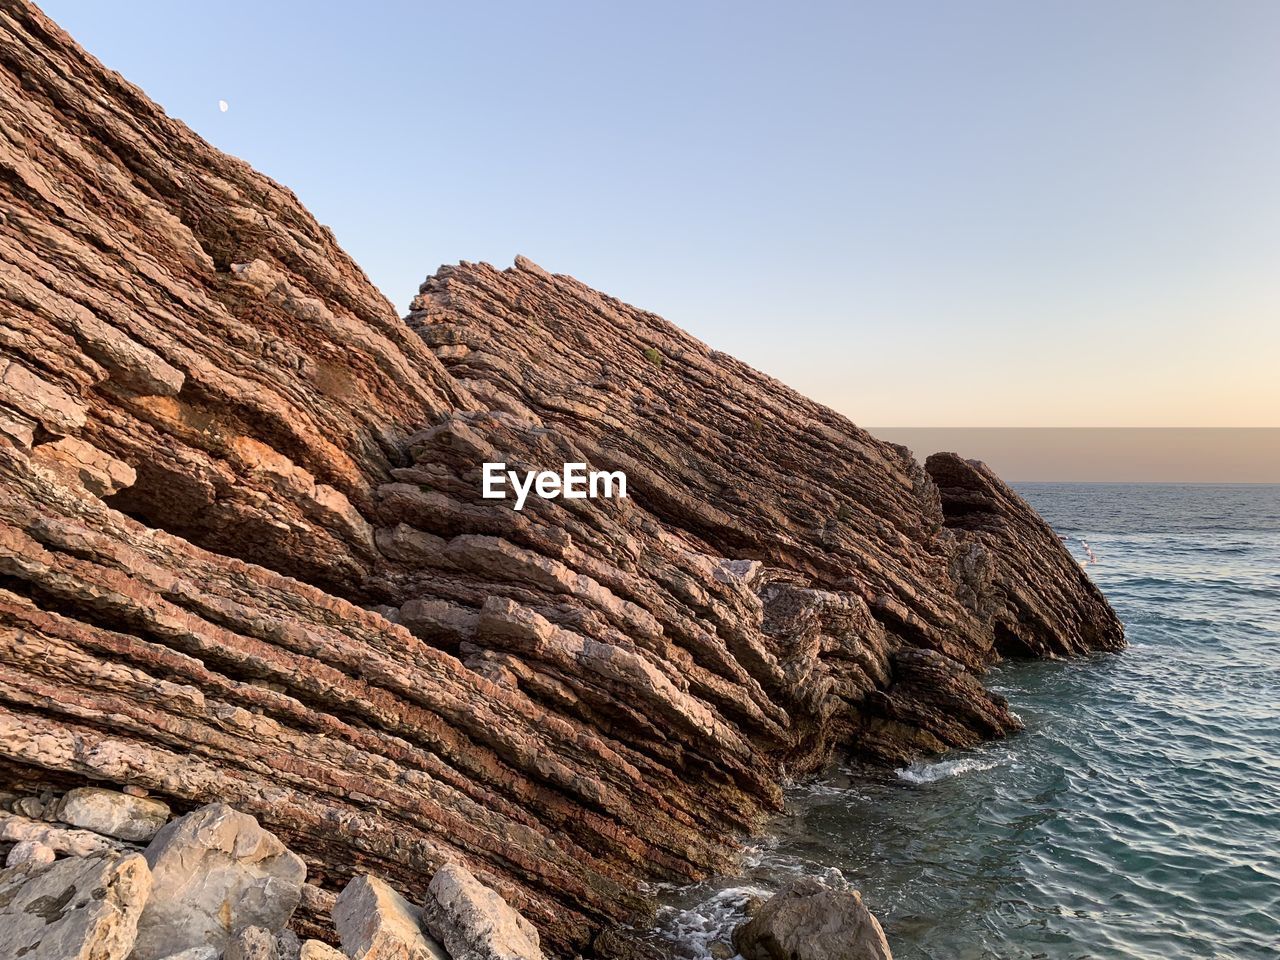 SCENIC VIEW OF ROCK FORMATION IN SEA AGAINST CLEAR SKY